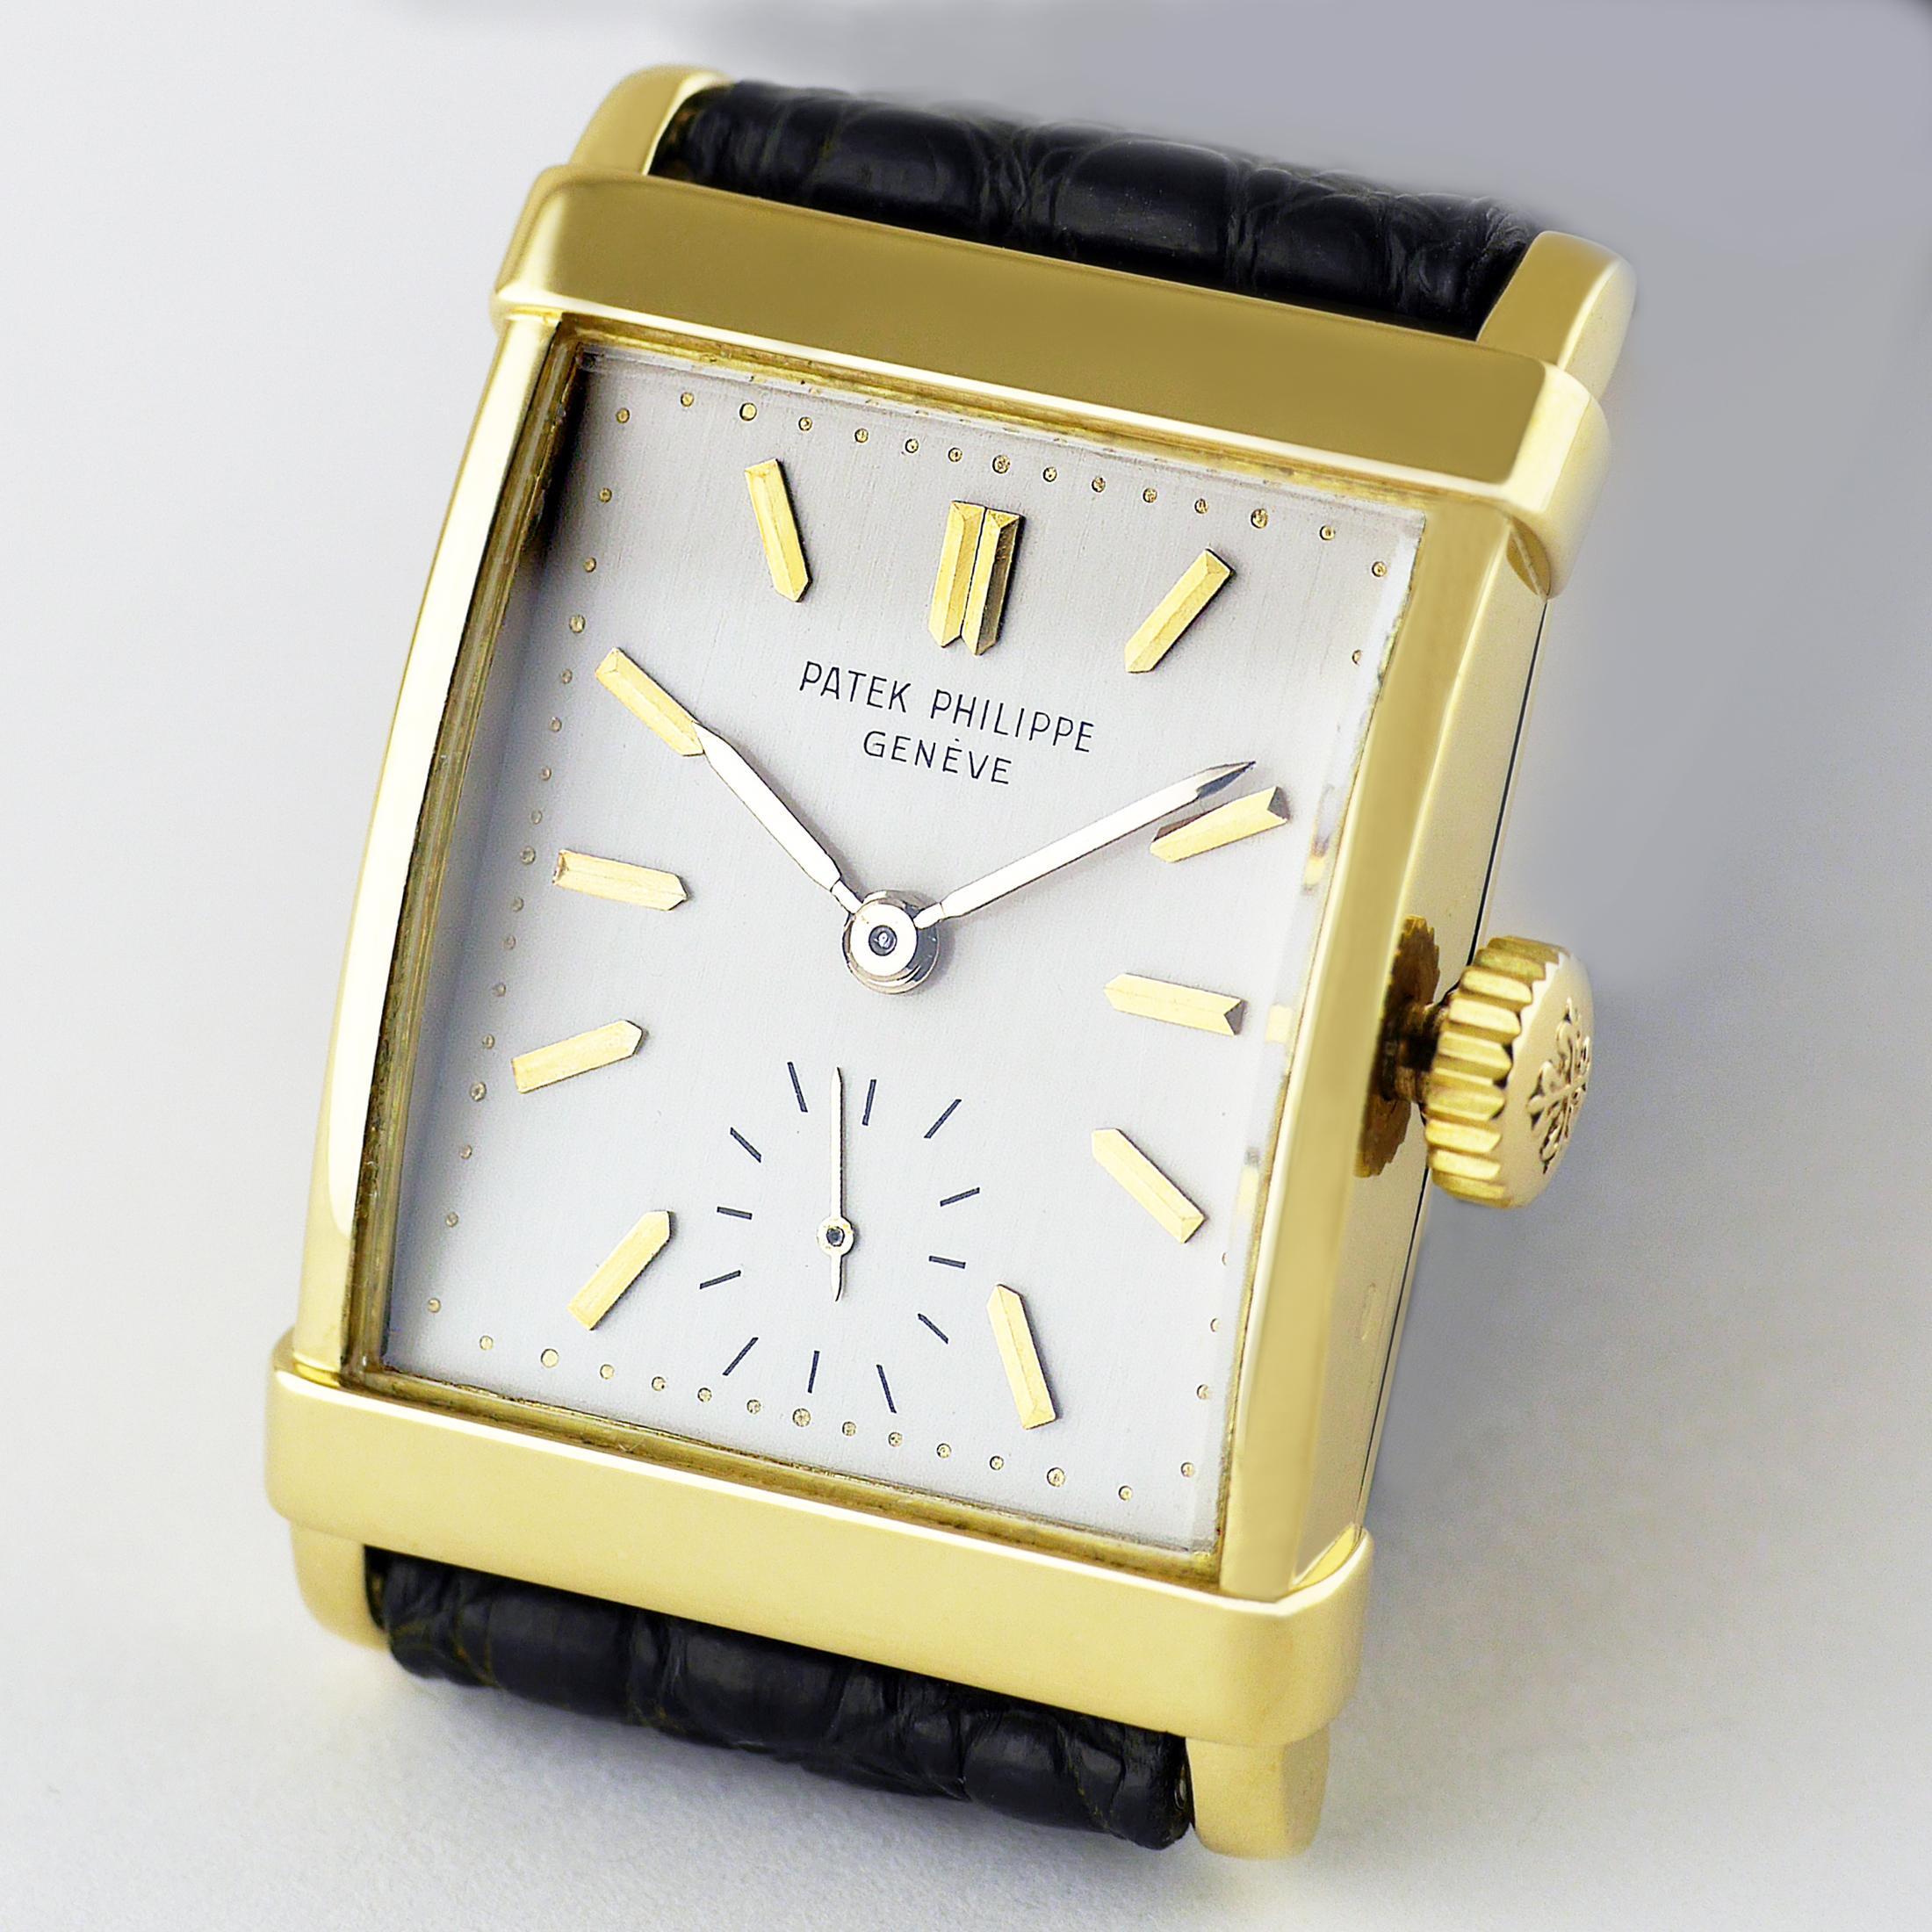 Patek Philippe Gold Wrist Watch Dated 1964 In Excellent Condition For Sale In London, GB